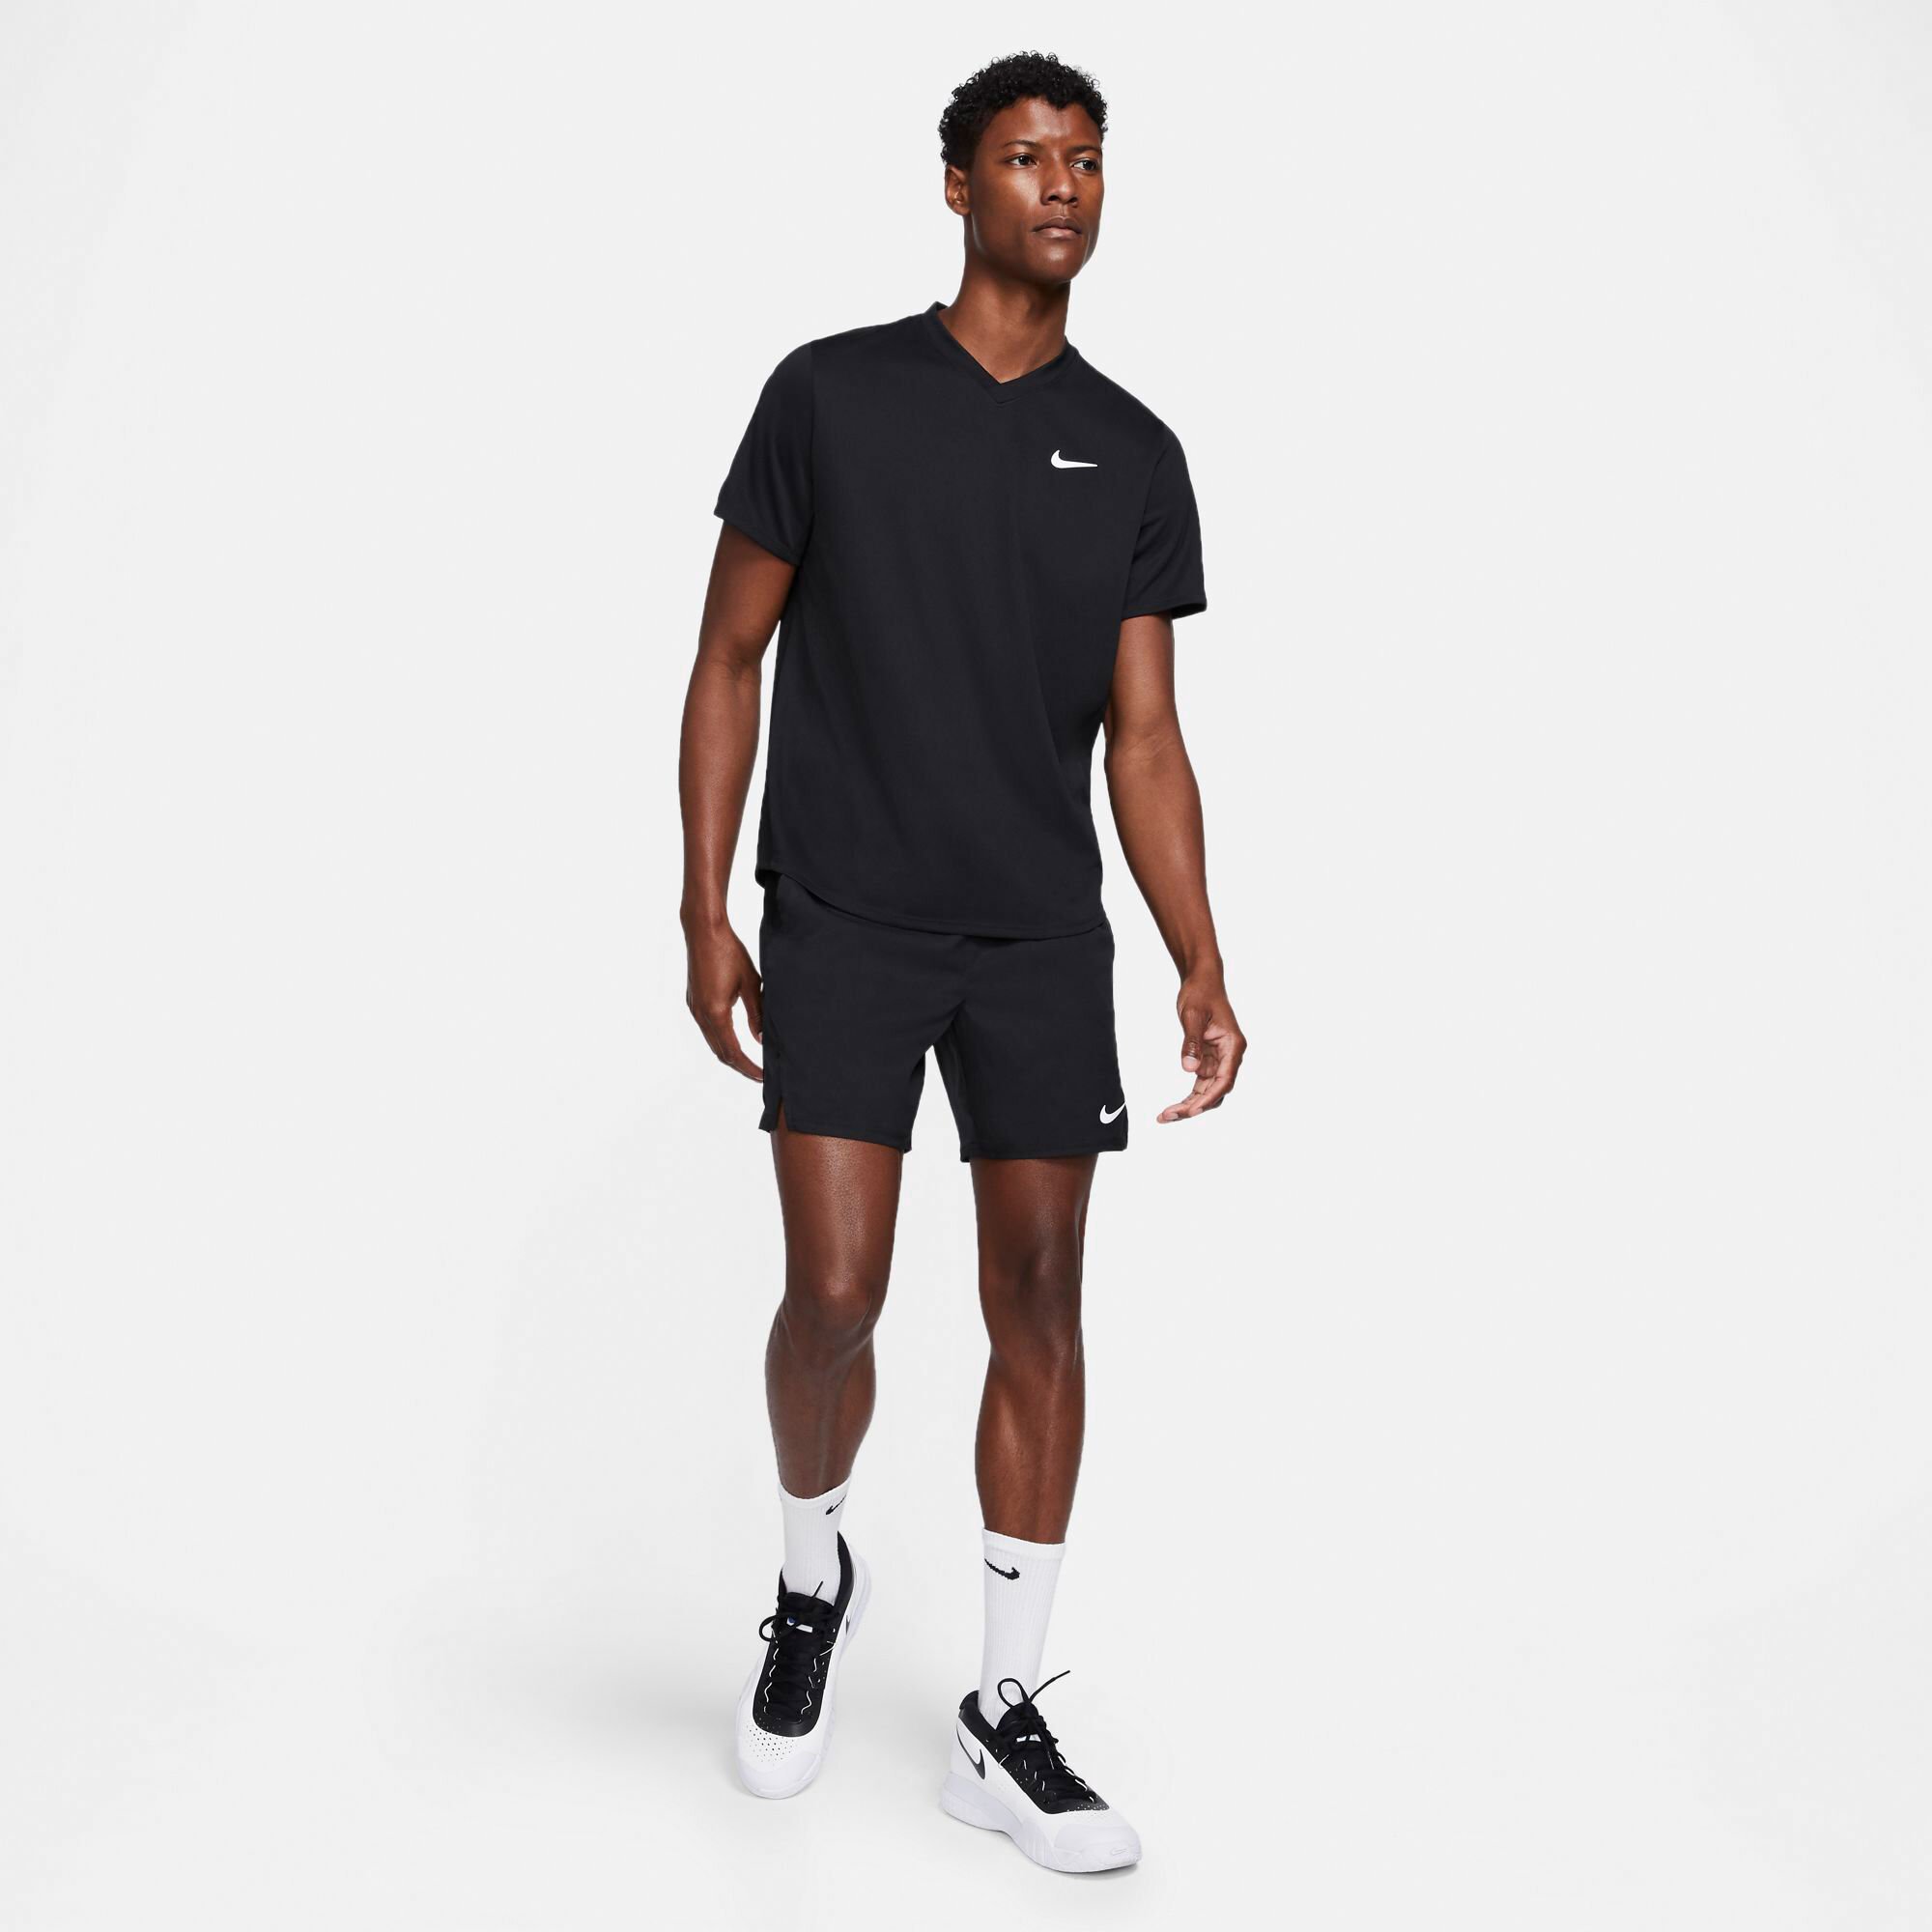 SHORT NIKE COURT DRY VICTORY 7IN - Nike - HOMME - VÊTEMENTS - TENNIS